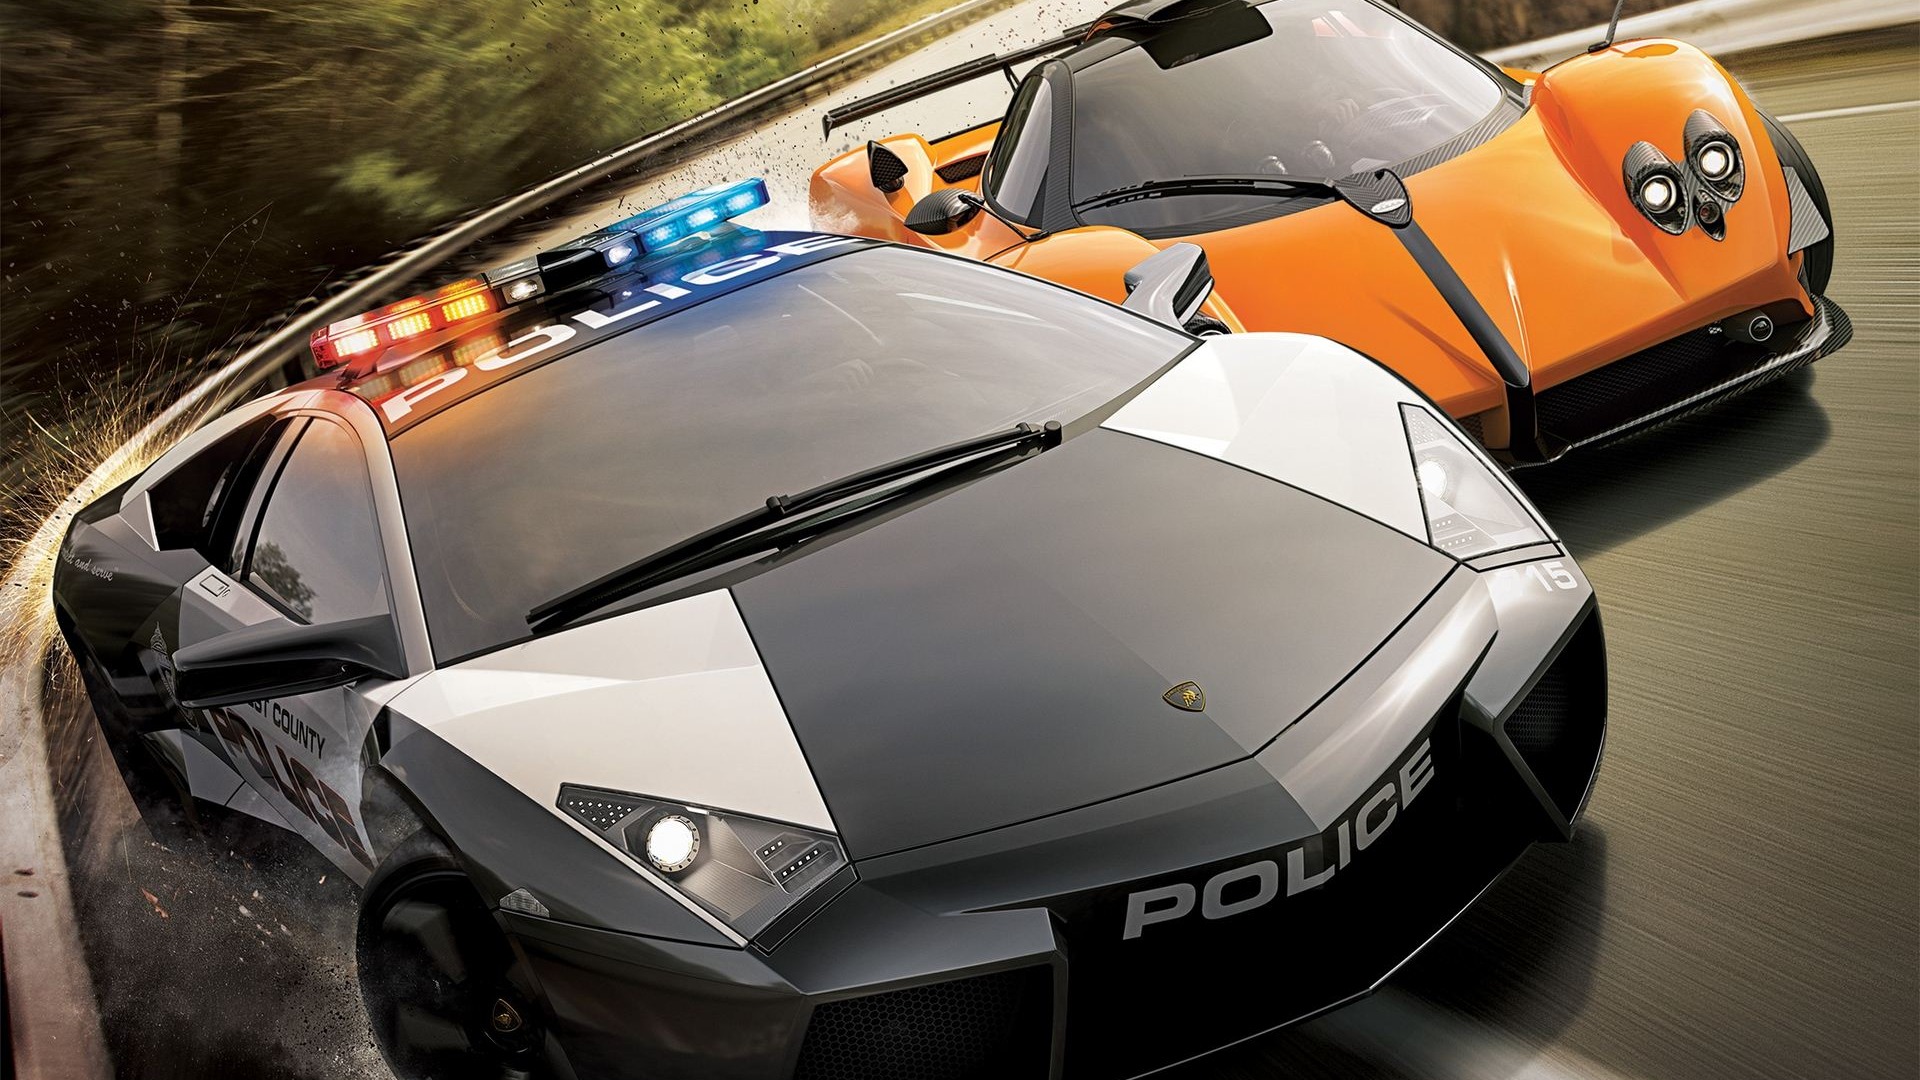 Need for Speed: Hot Pursuit 極品飛車14：熱力追踪 #3 - 1920x1080